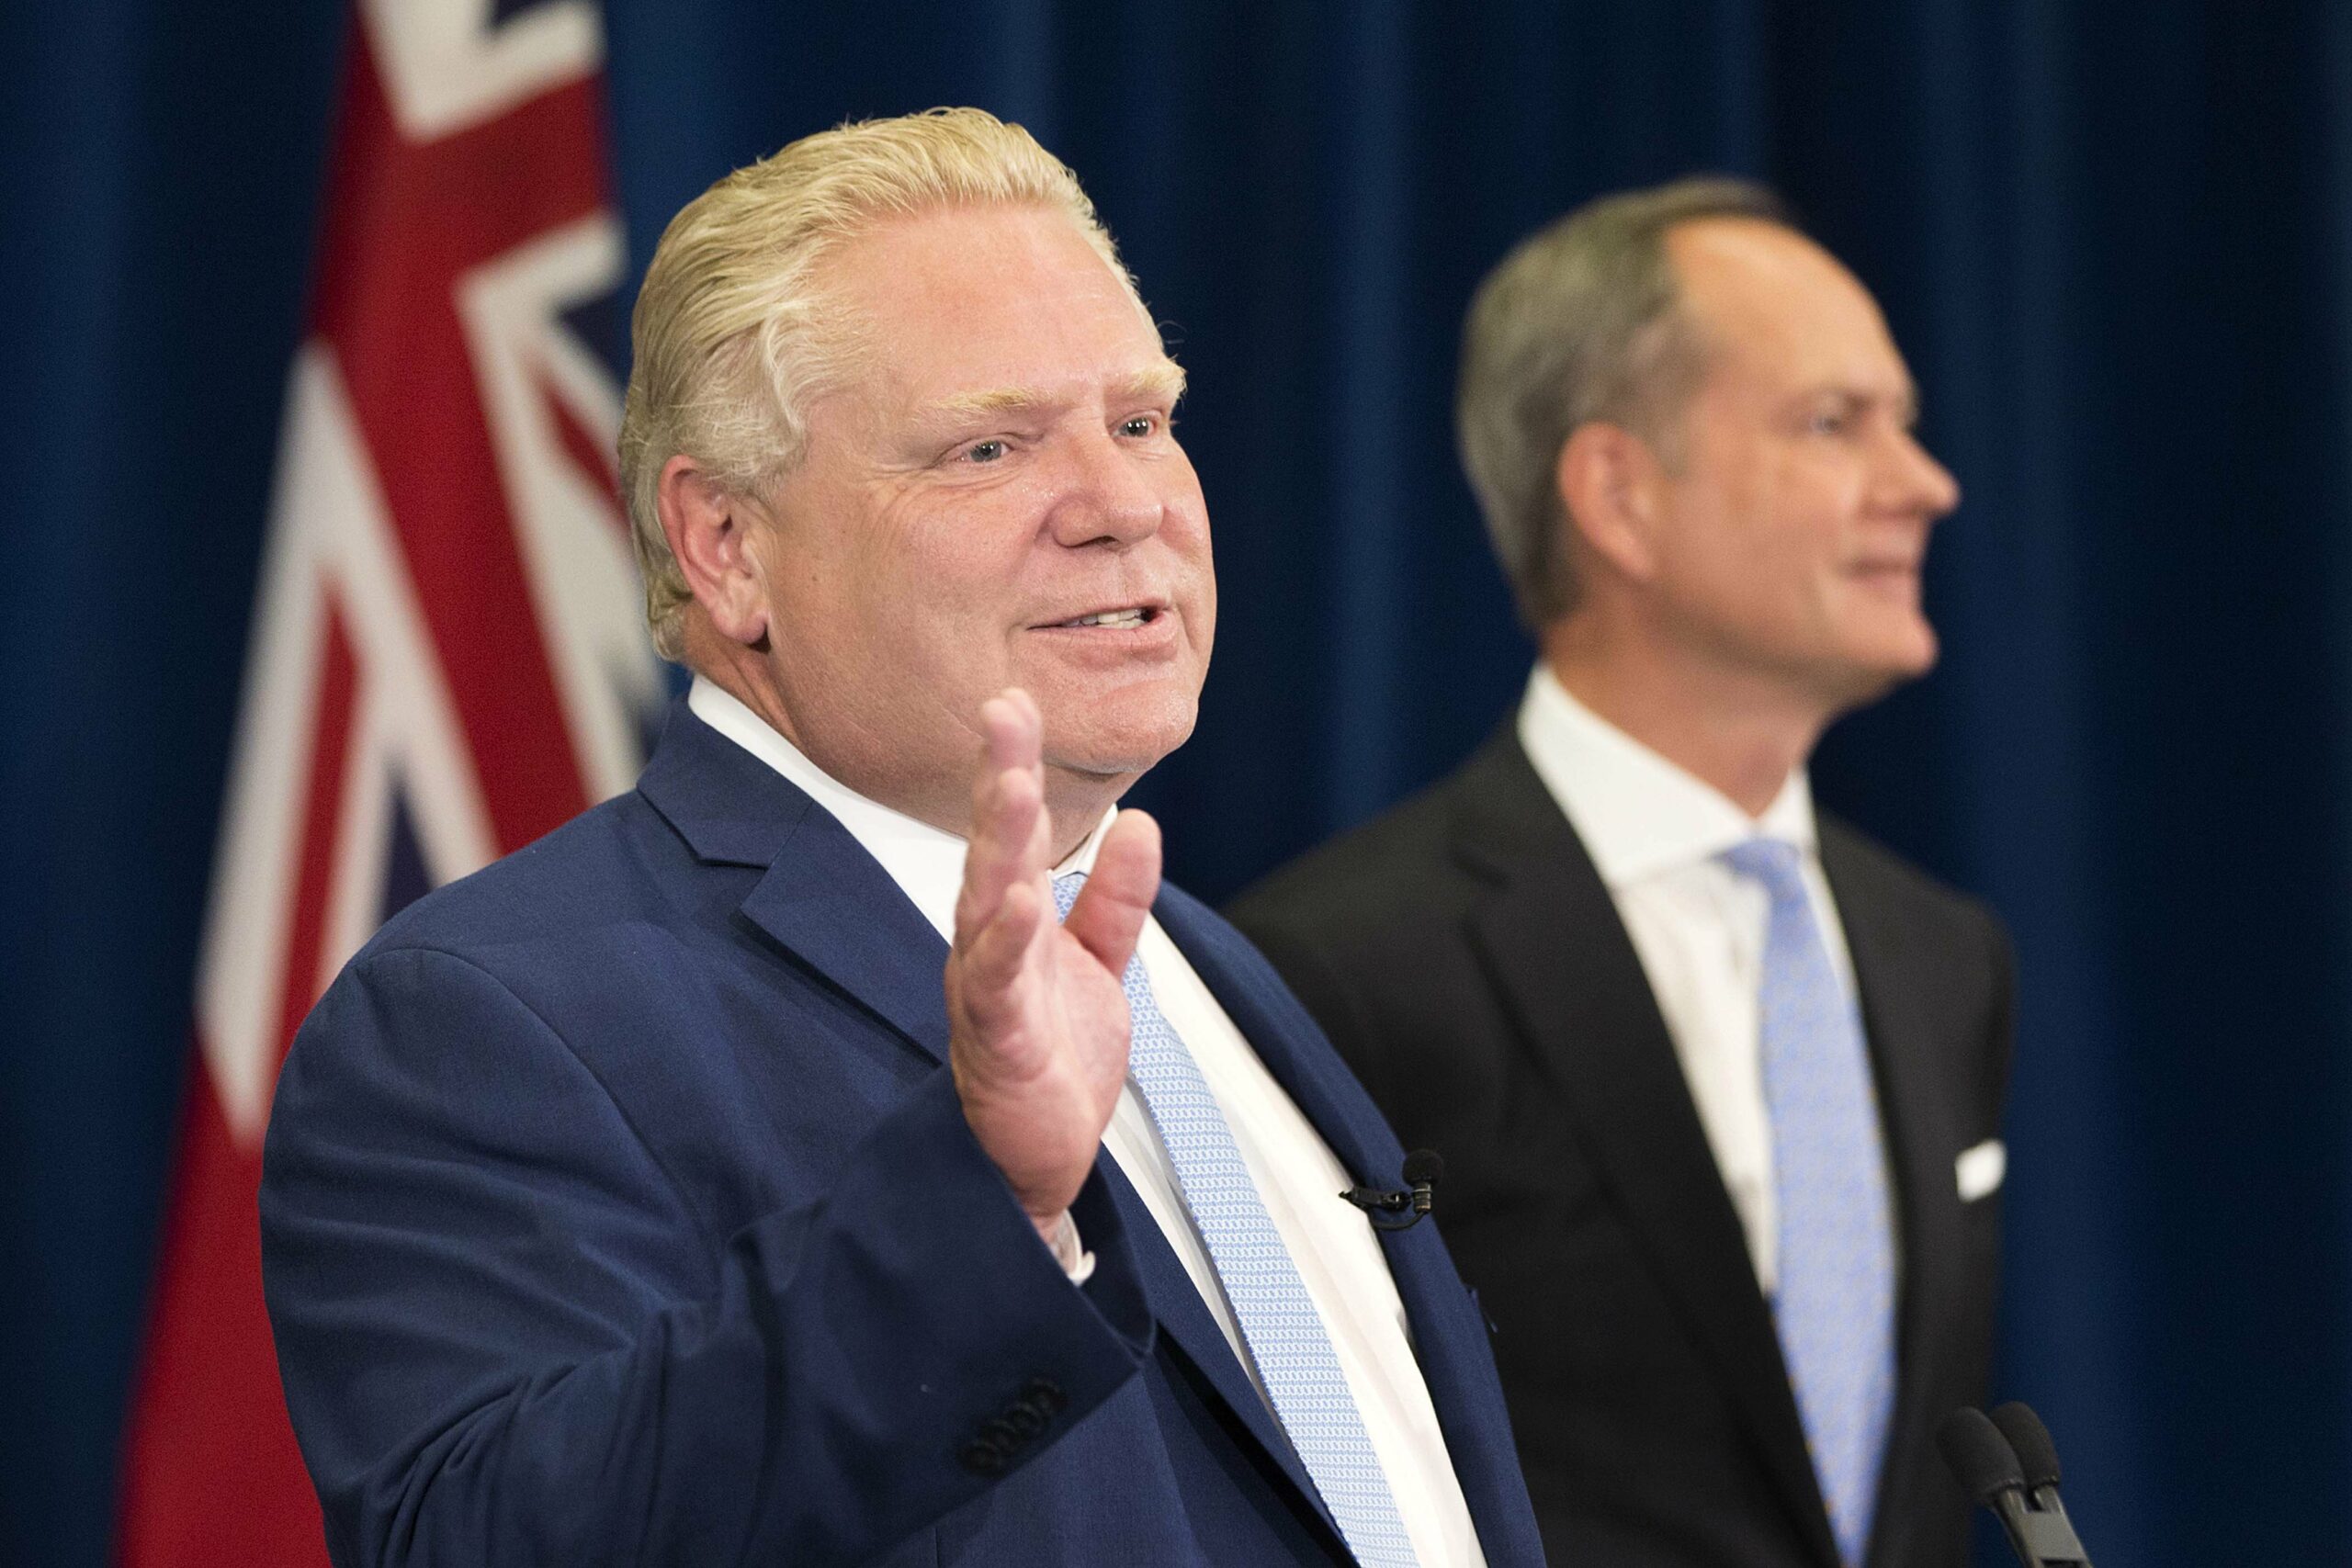 Ontario businesses can use federal vaccine passport: premier's office